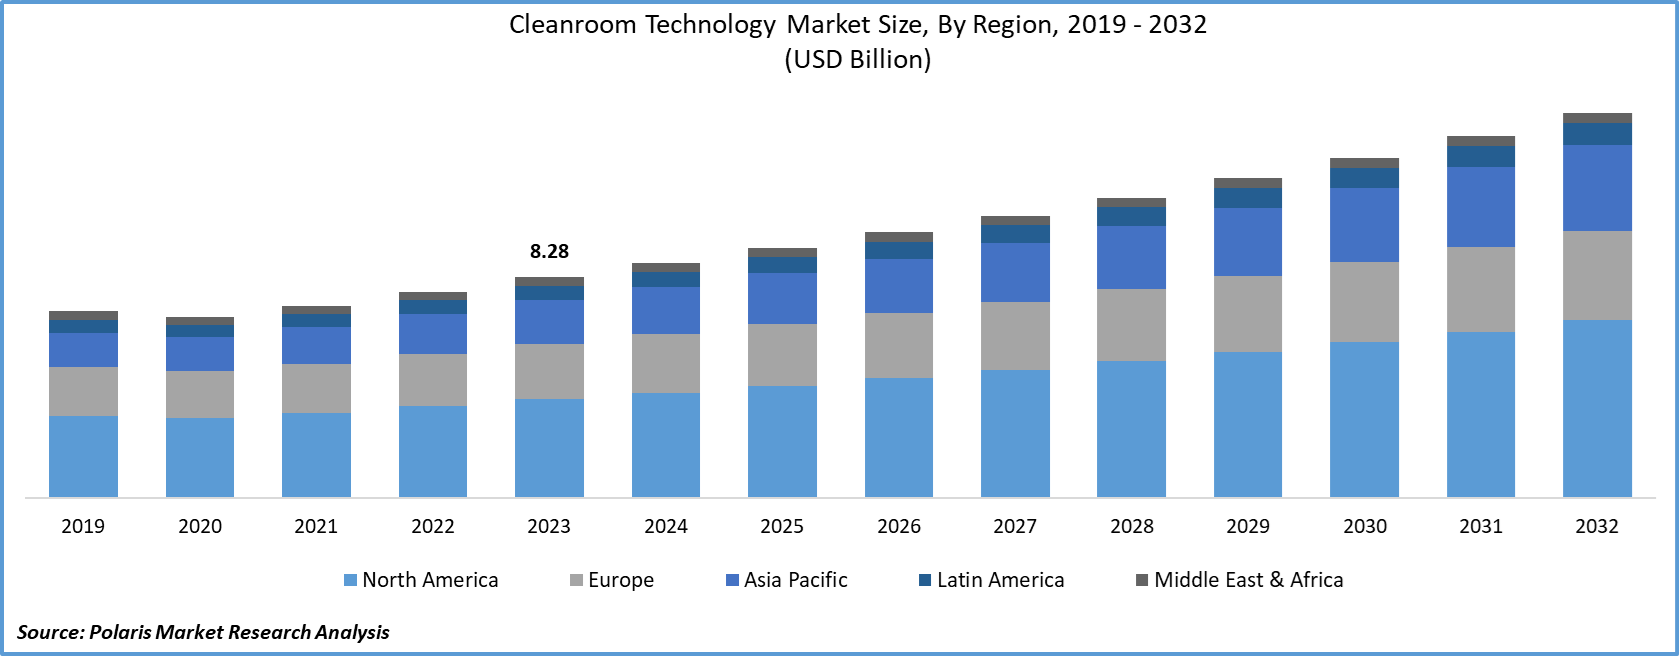 Cleanroom Technology Market Size